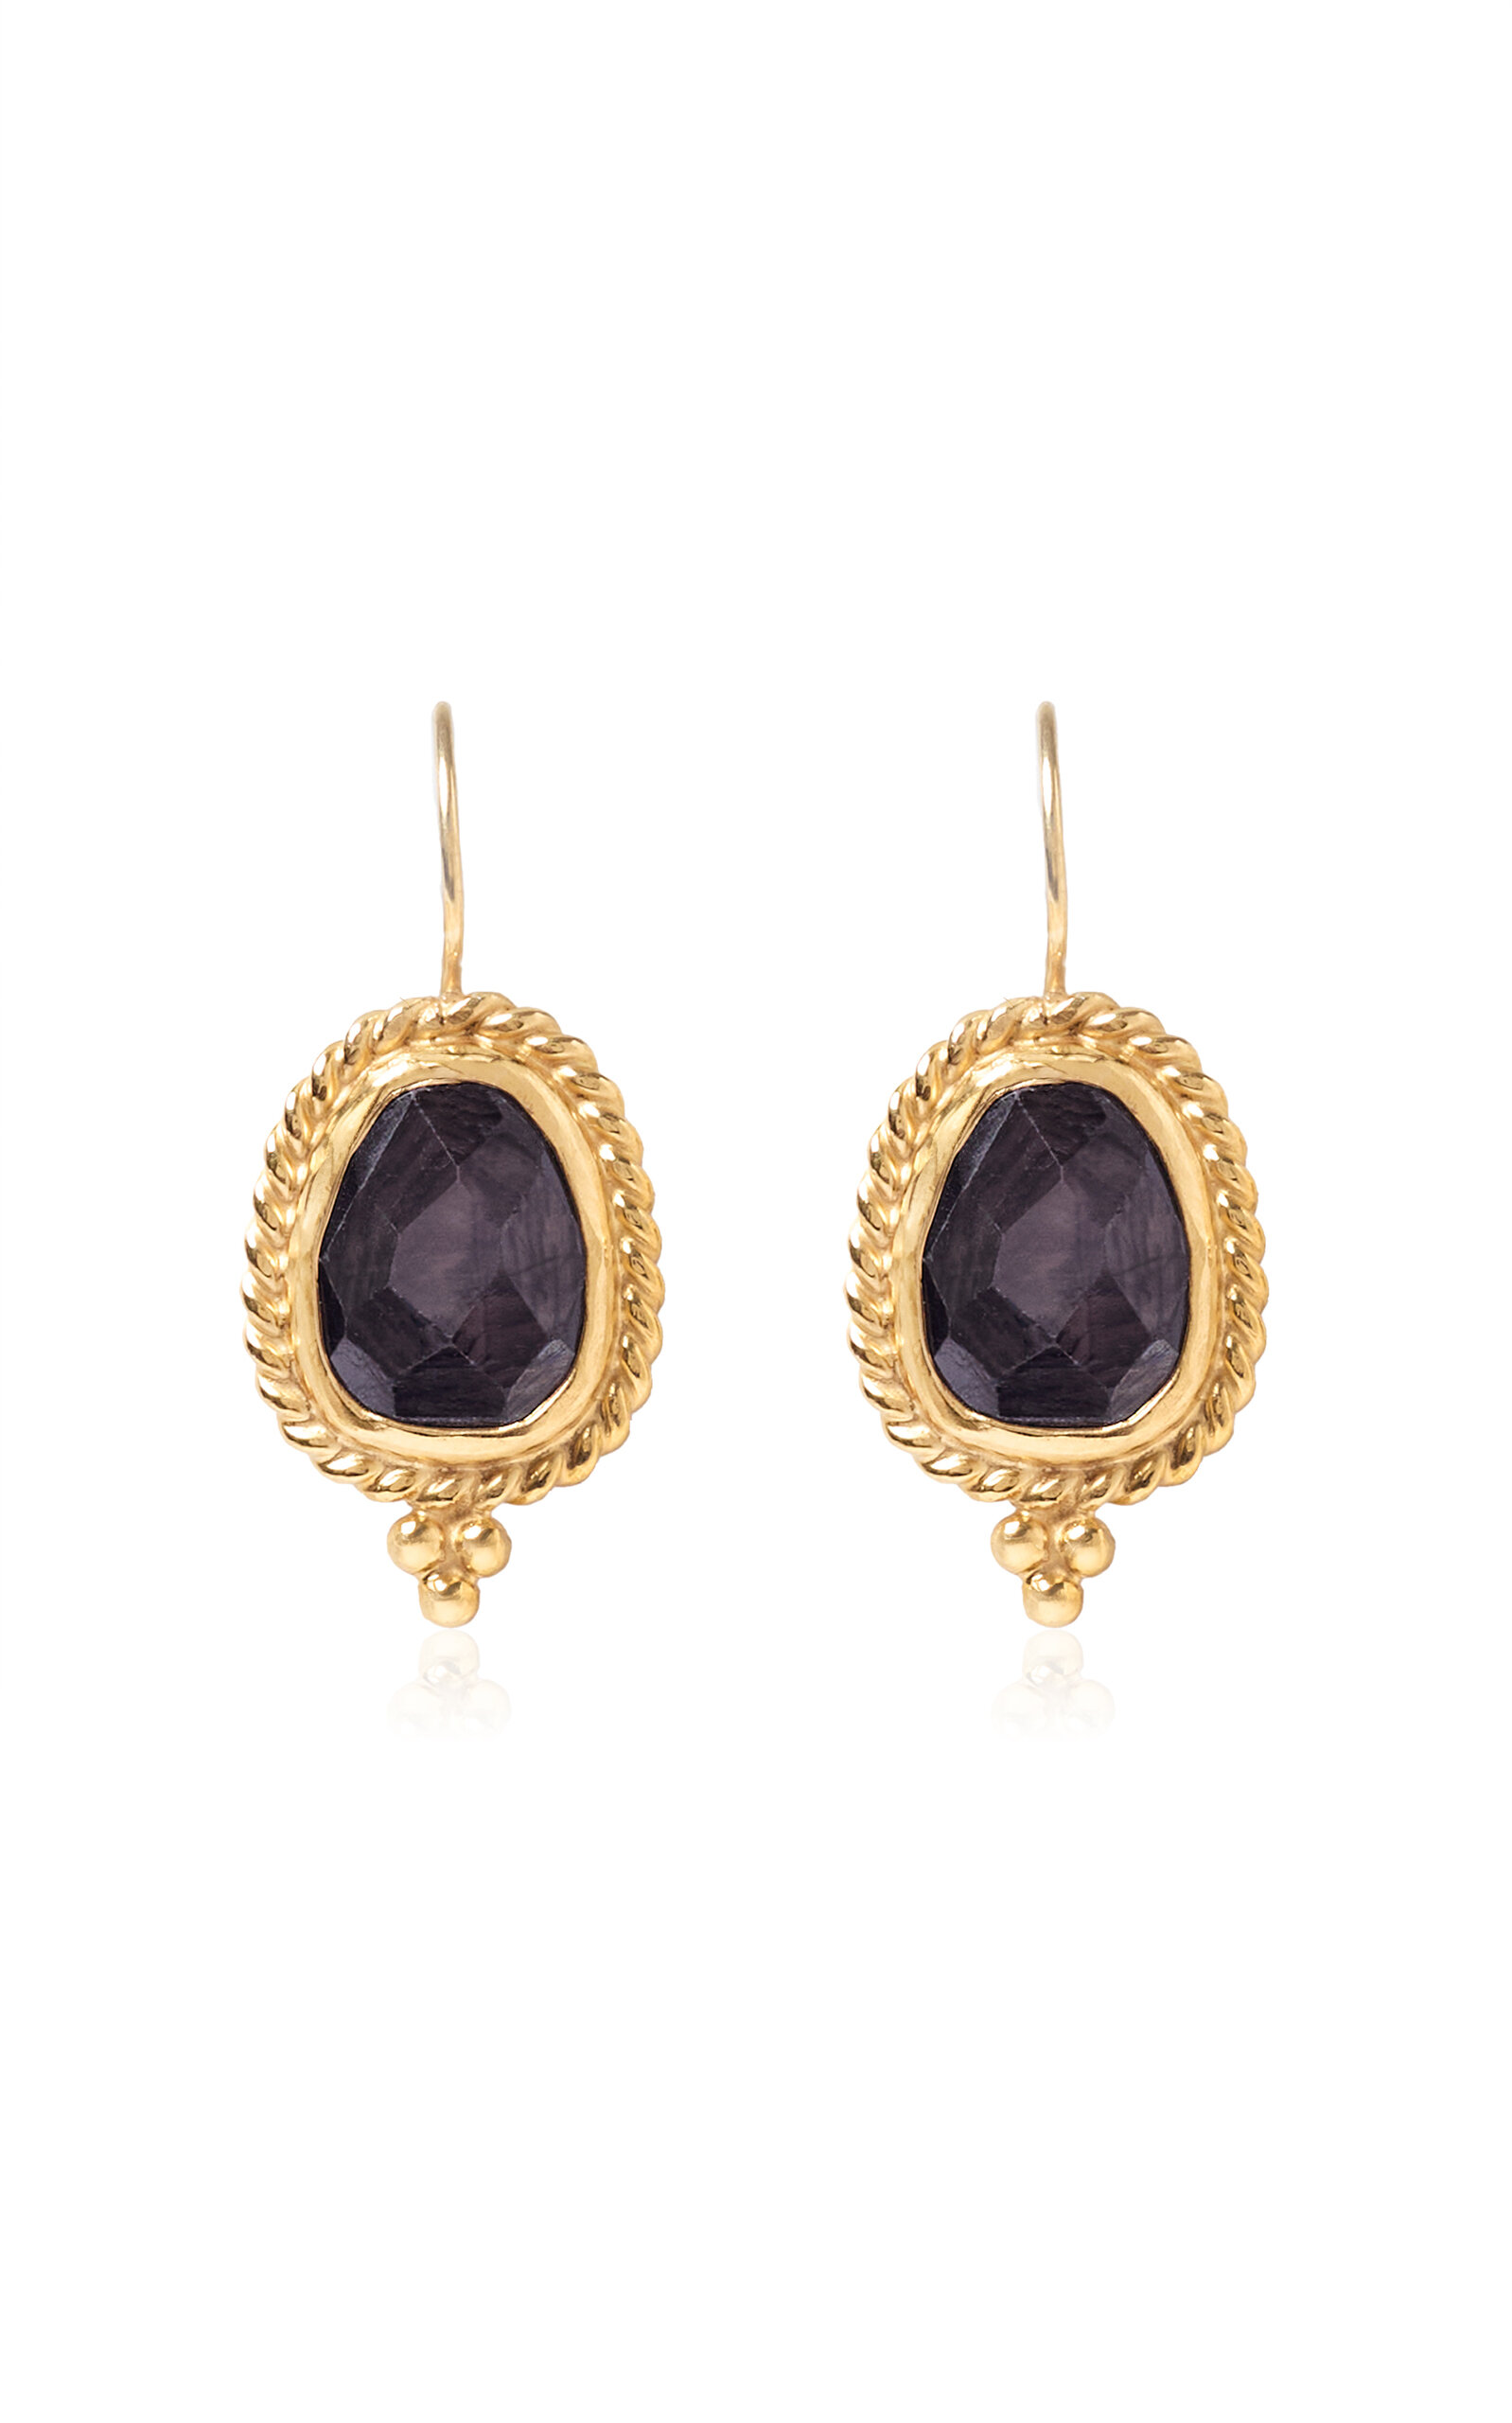 Exclusive Vignette 18K Gold-Plated Earrings